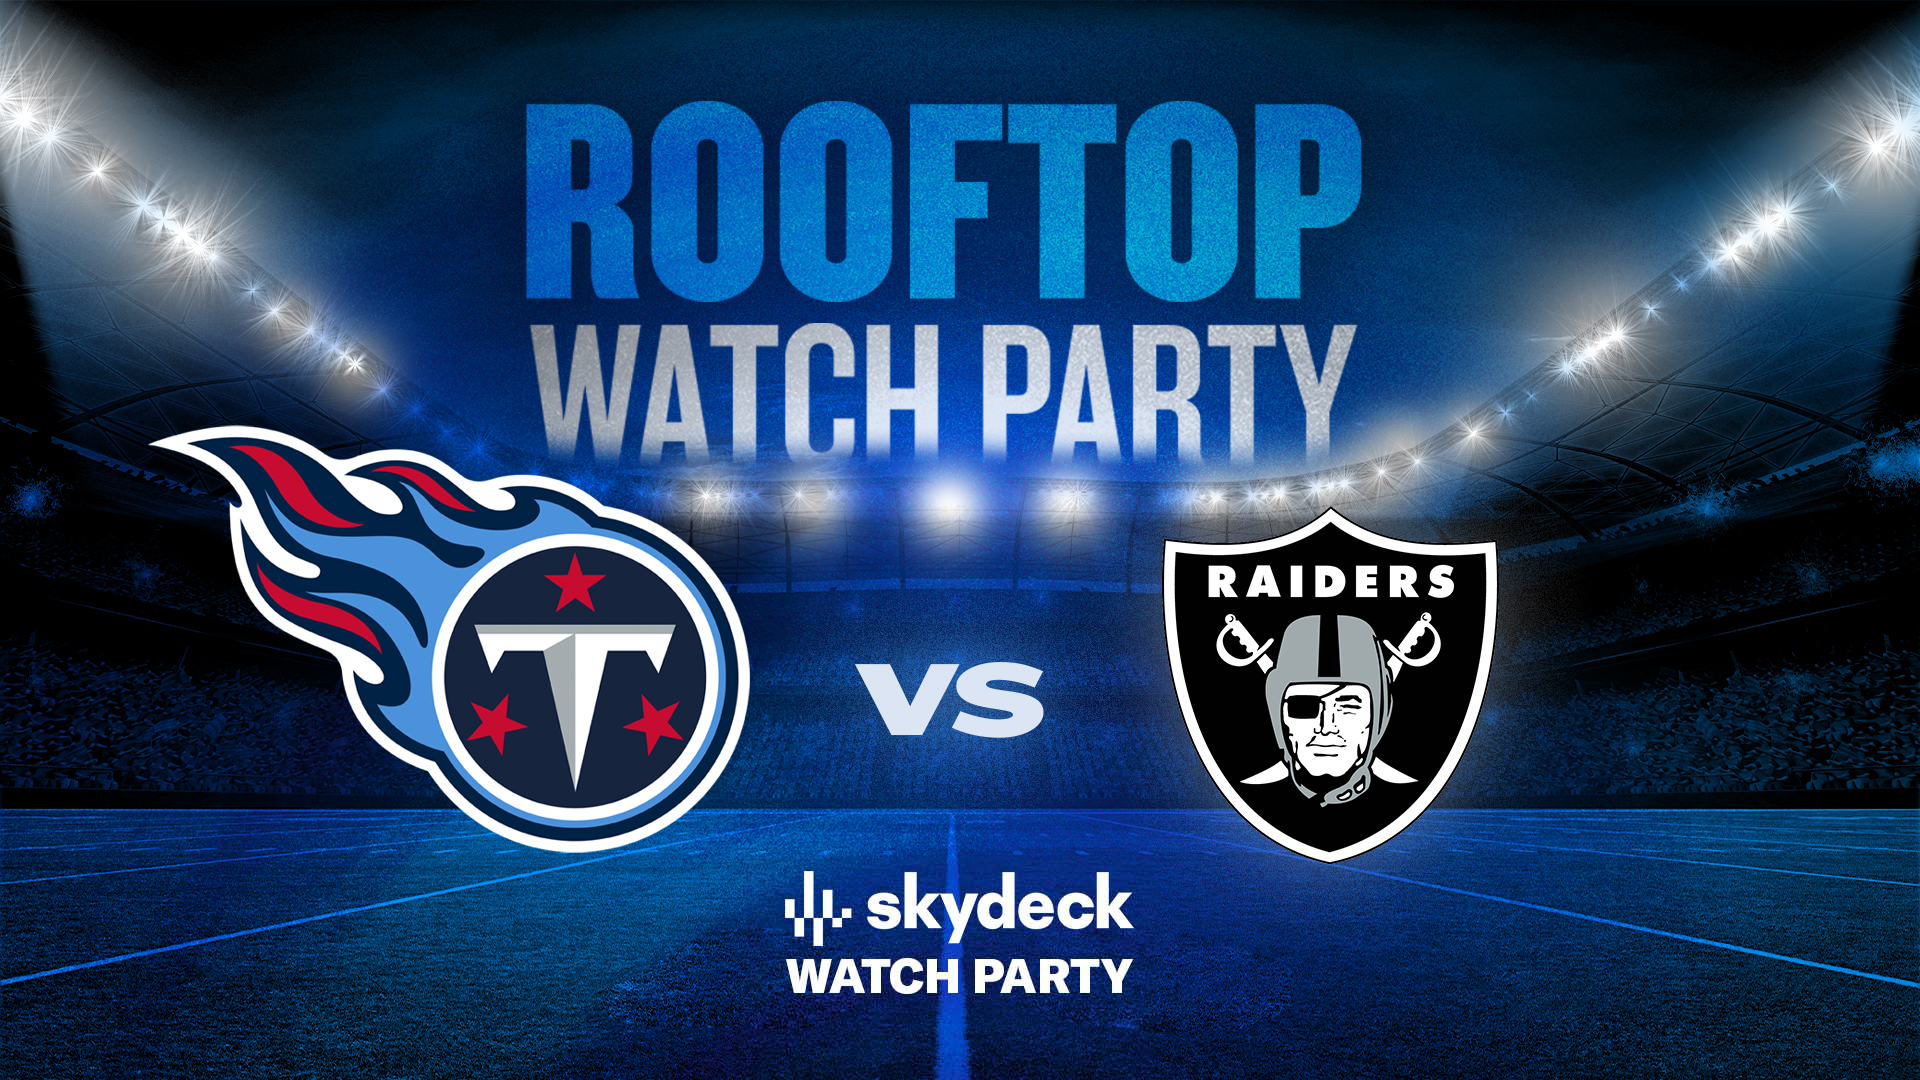 Promo image of Titans vs. Raiders | Skydeck Watch Party